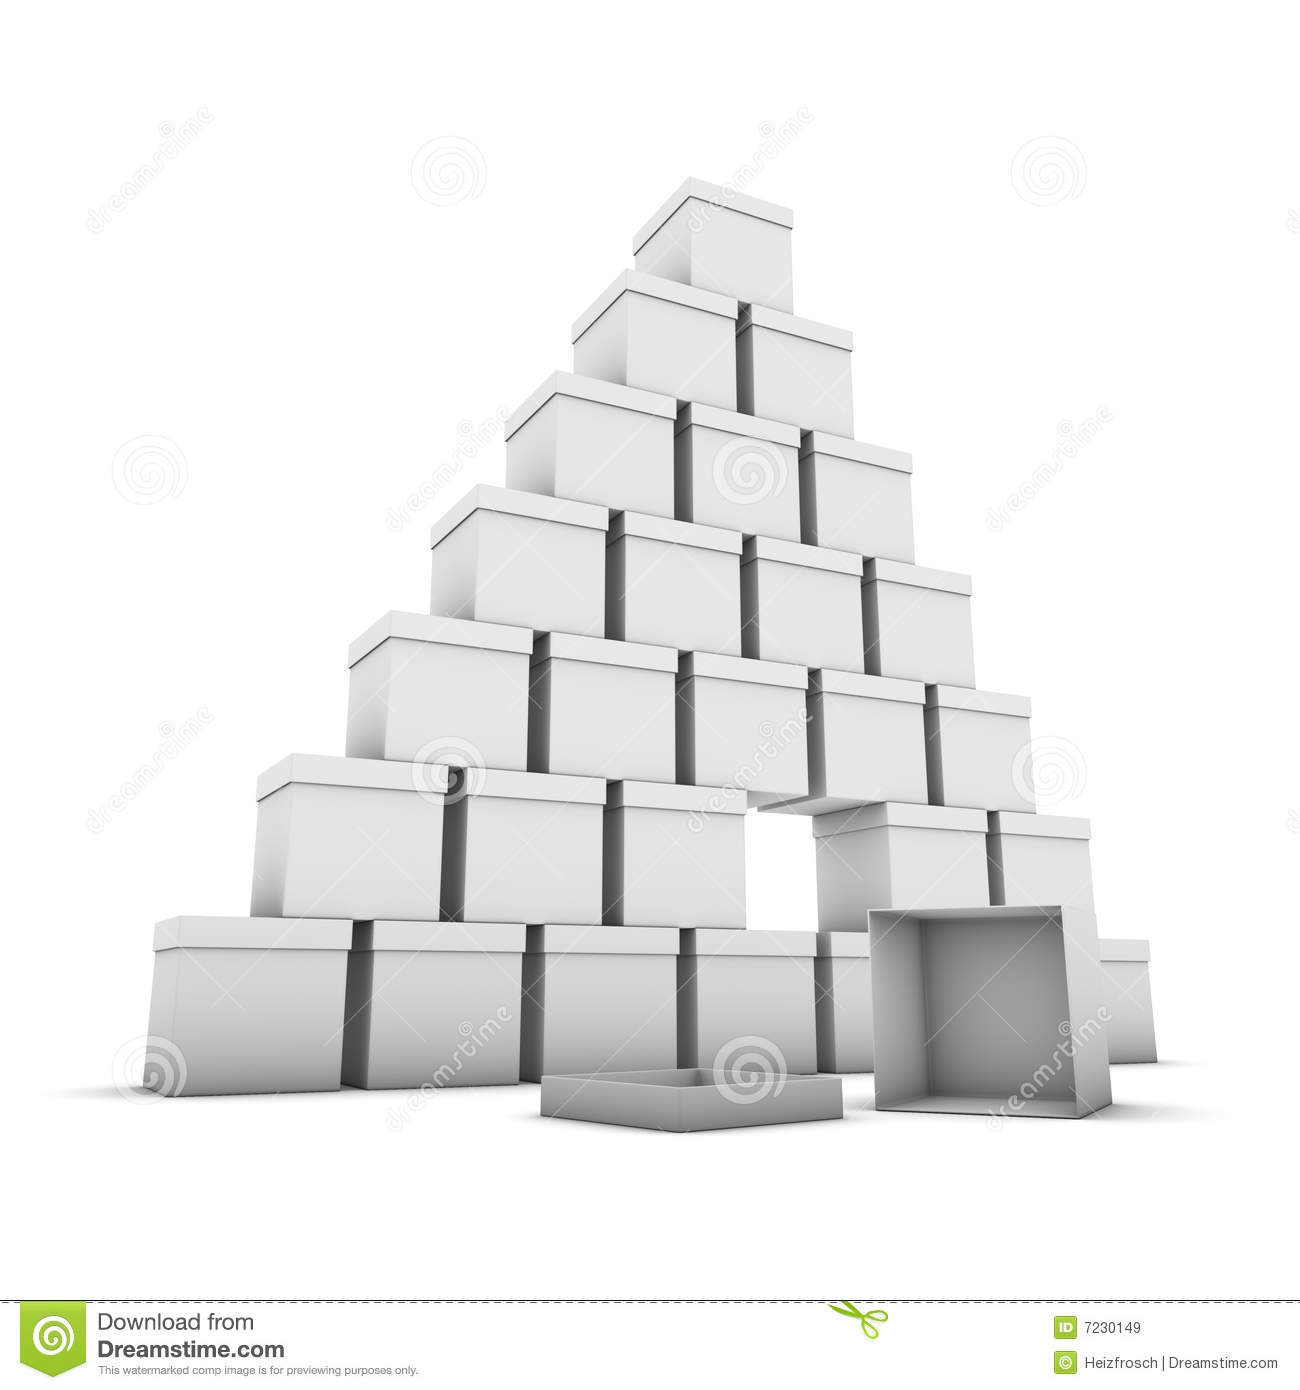 Stacked Boxes Royalty Free Stock Images   Image  7230149